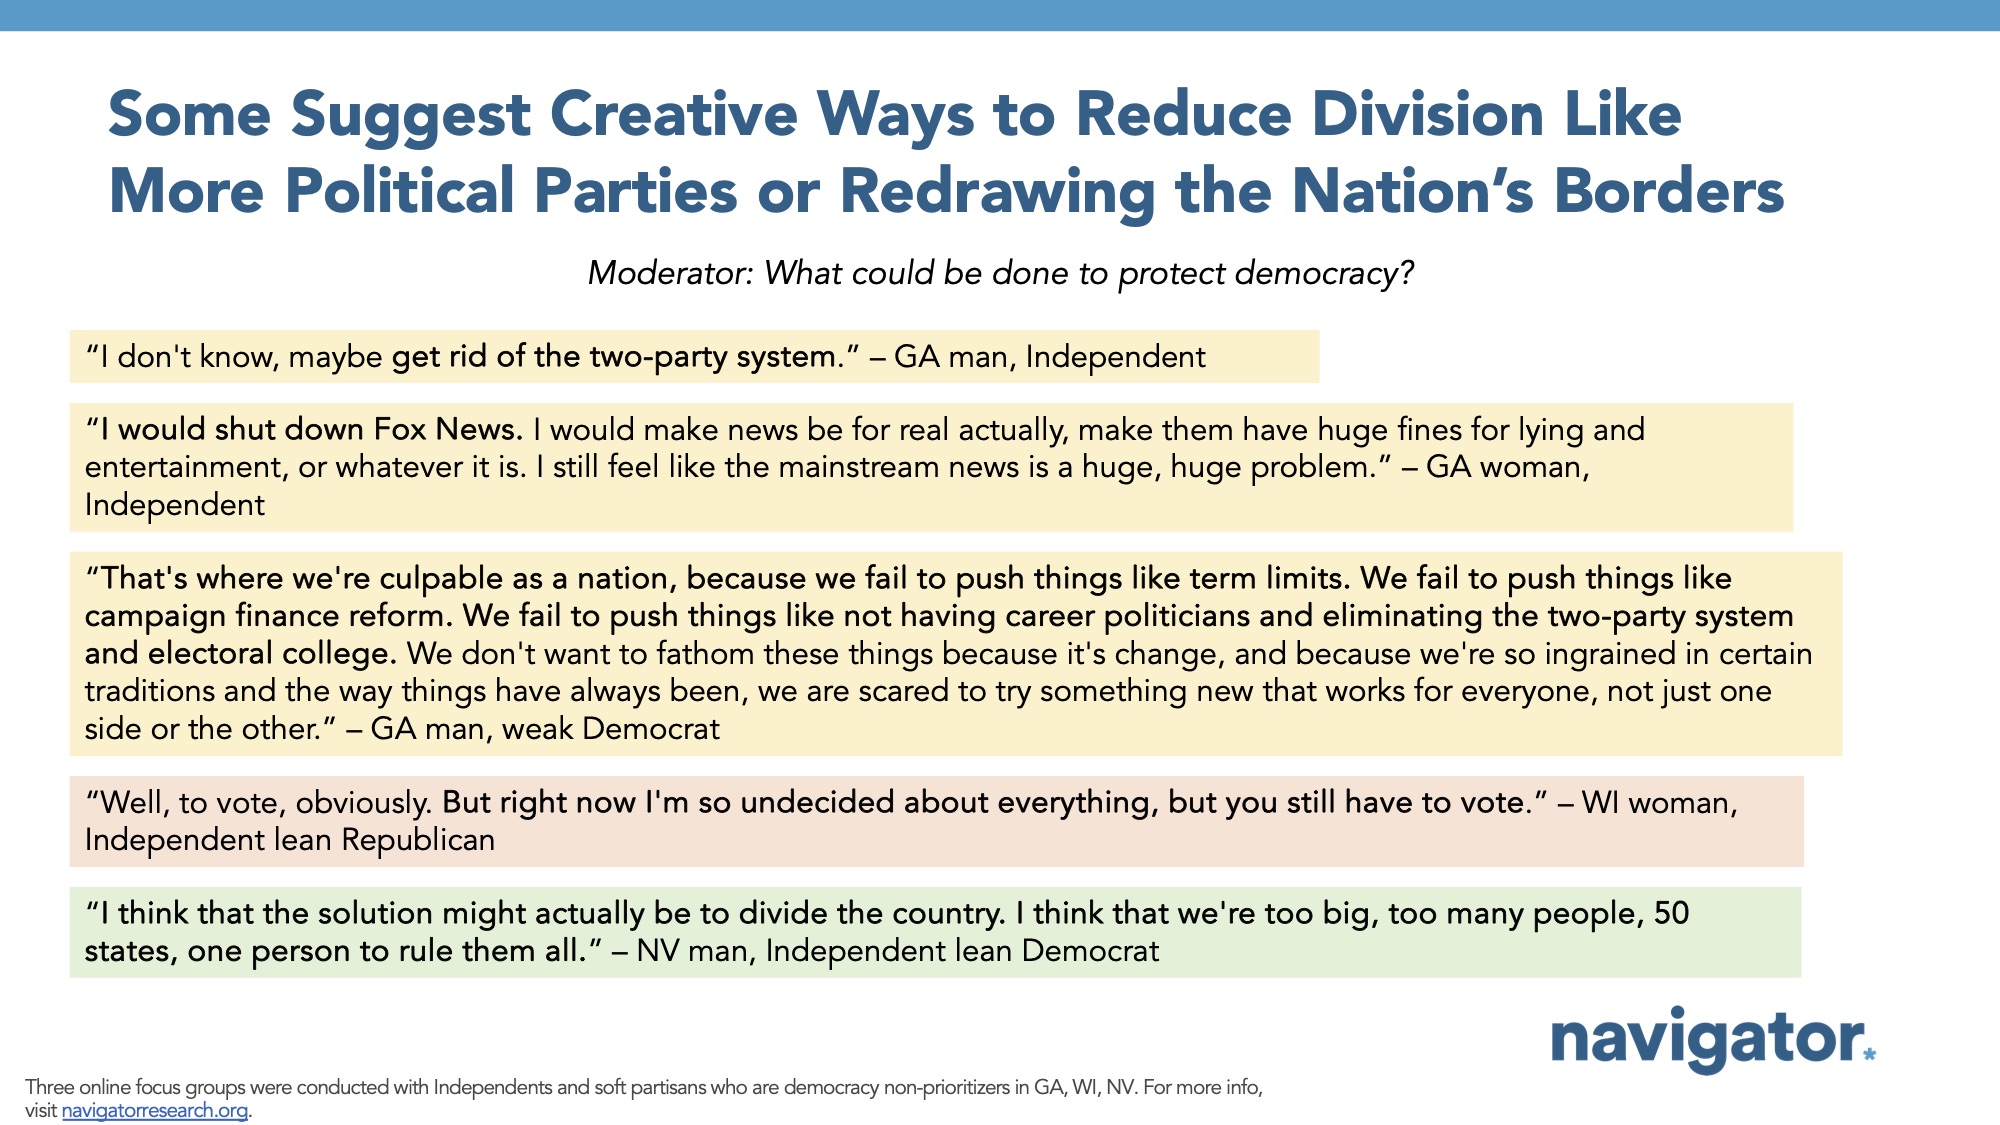 Focus group report slide titled: Some Suggest Creative Ways to Reduce Division Like More Political Parties or Redrawing the Nation’s Borders